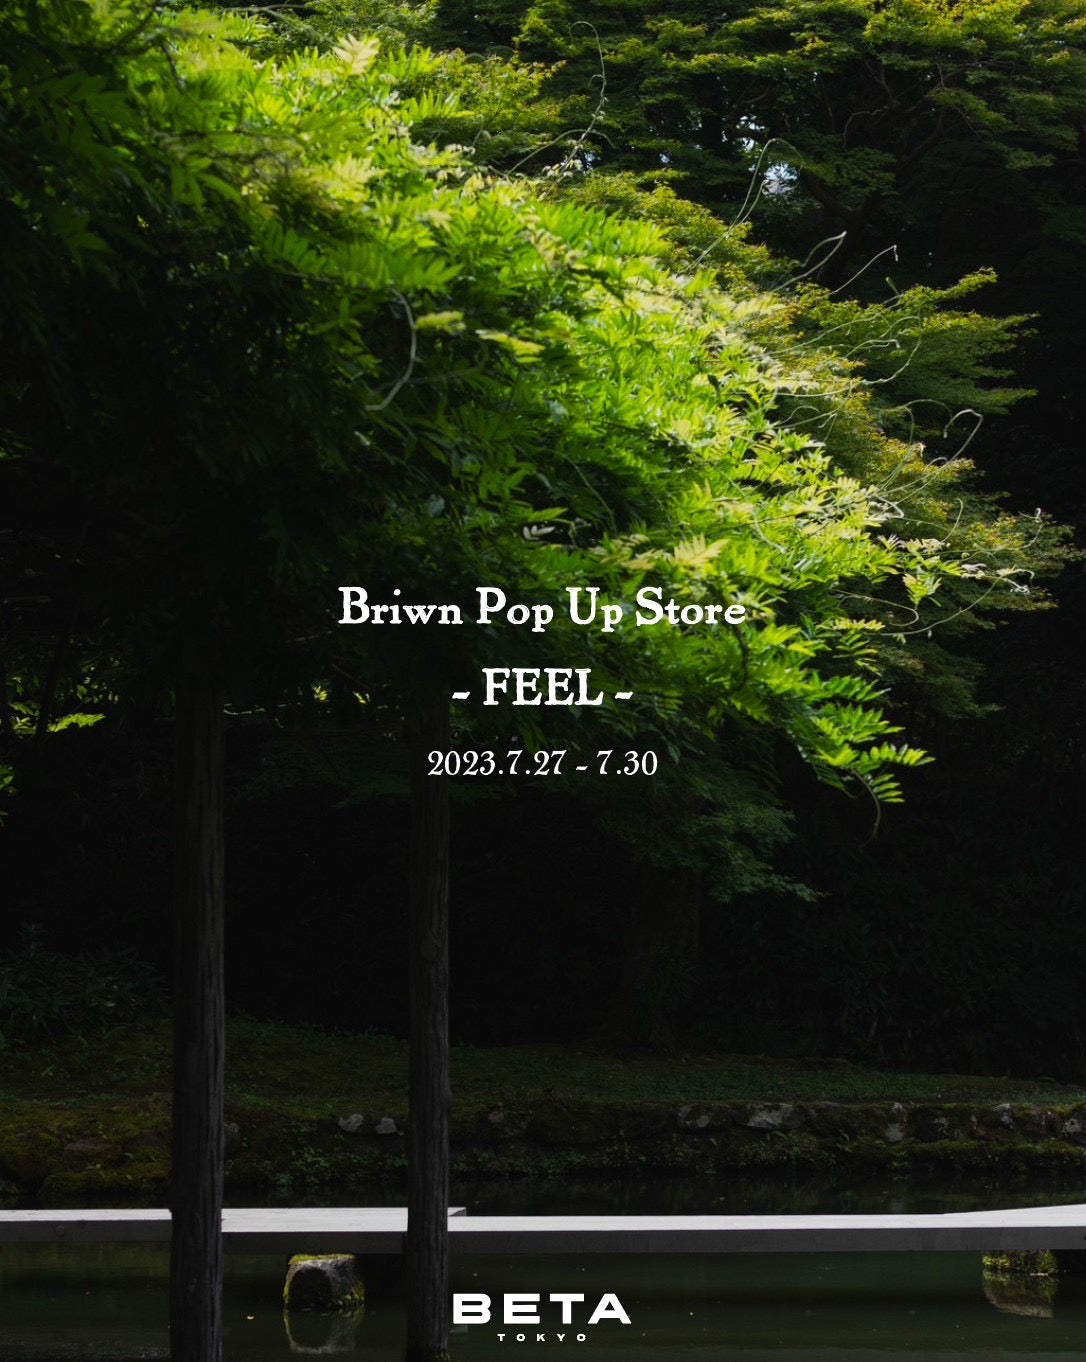 Briwn Pop Up Store -FEEL- Pt.2 at BETA TOKYO will be holding